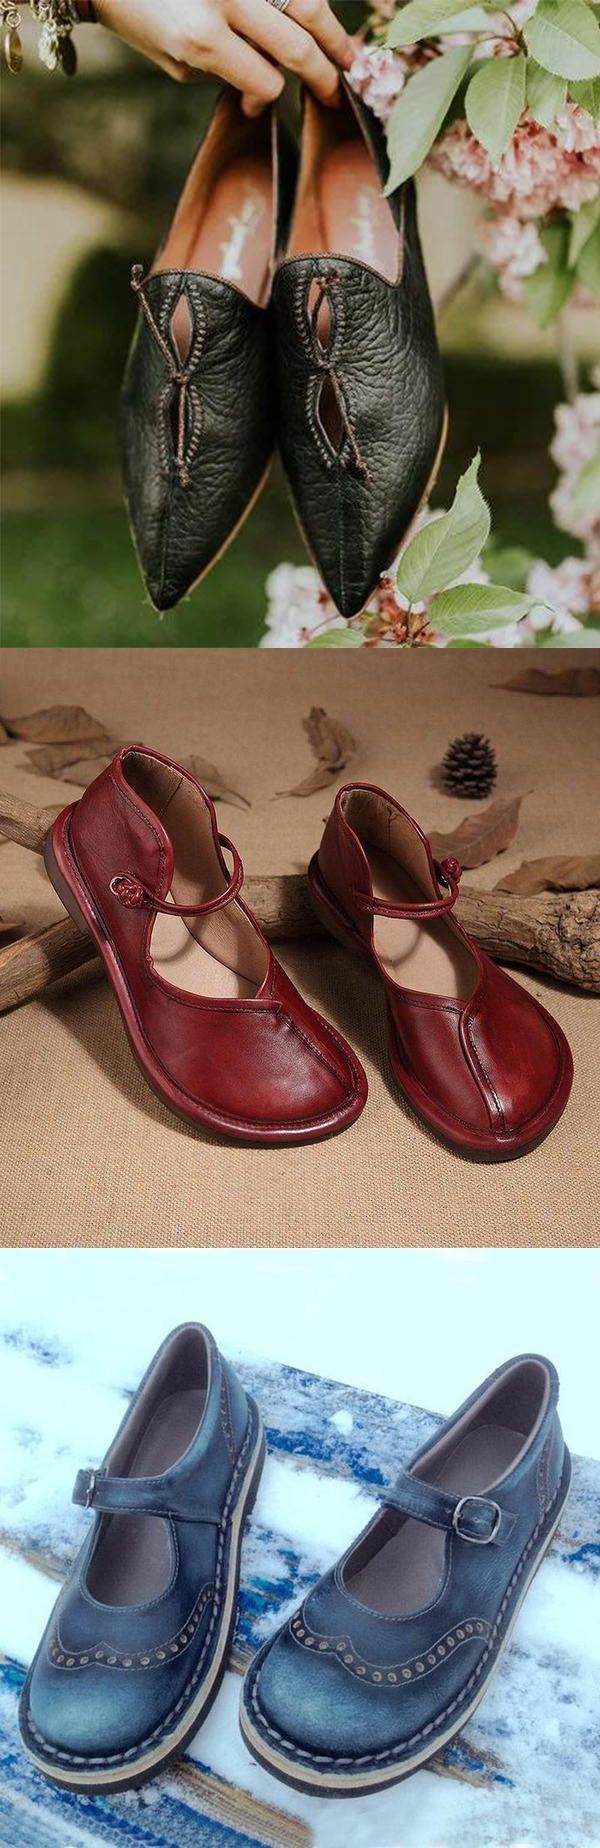 Hot Sale!Pointed Toe Daily Loafers Flat Heel Forest Shoes -   17 diy face whitening ideas